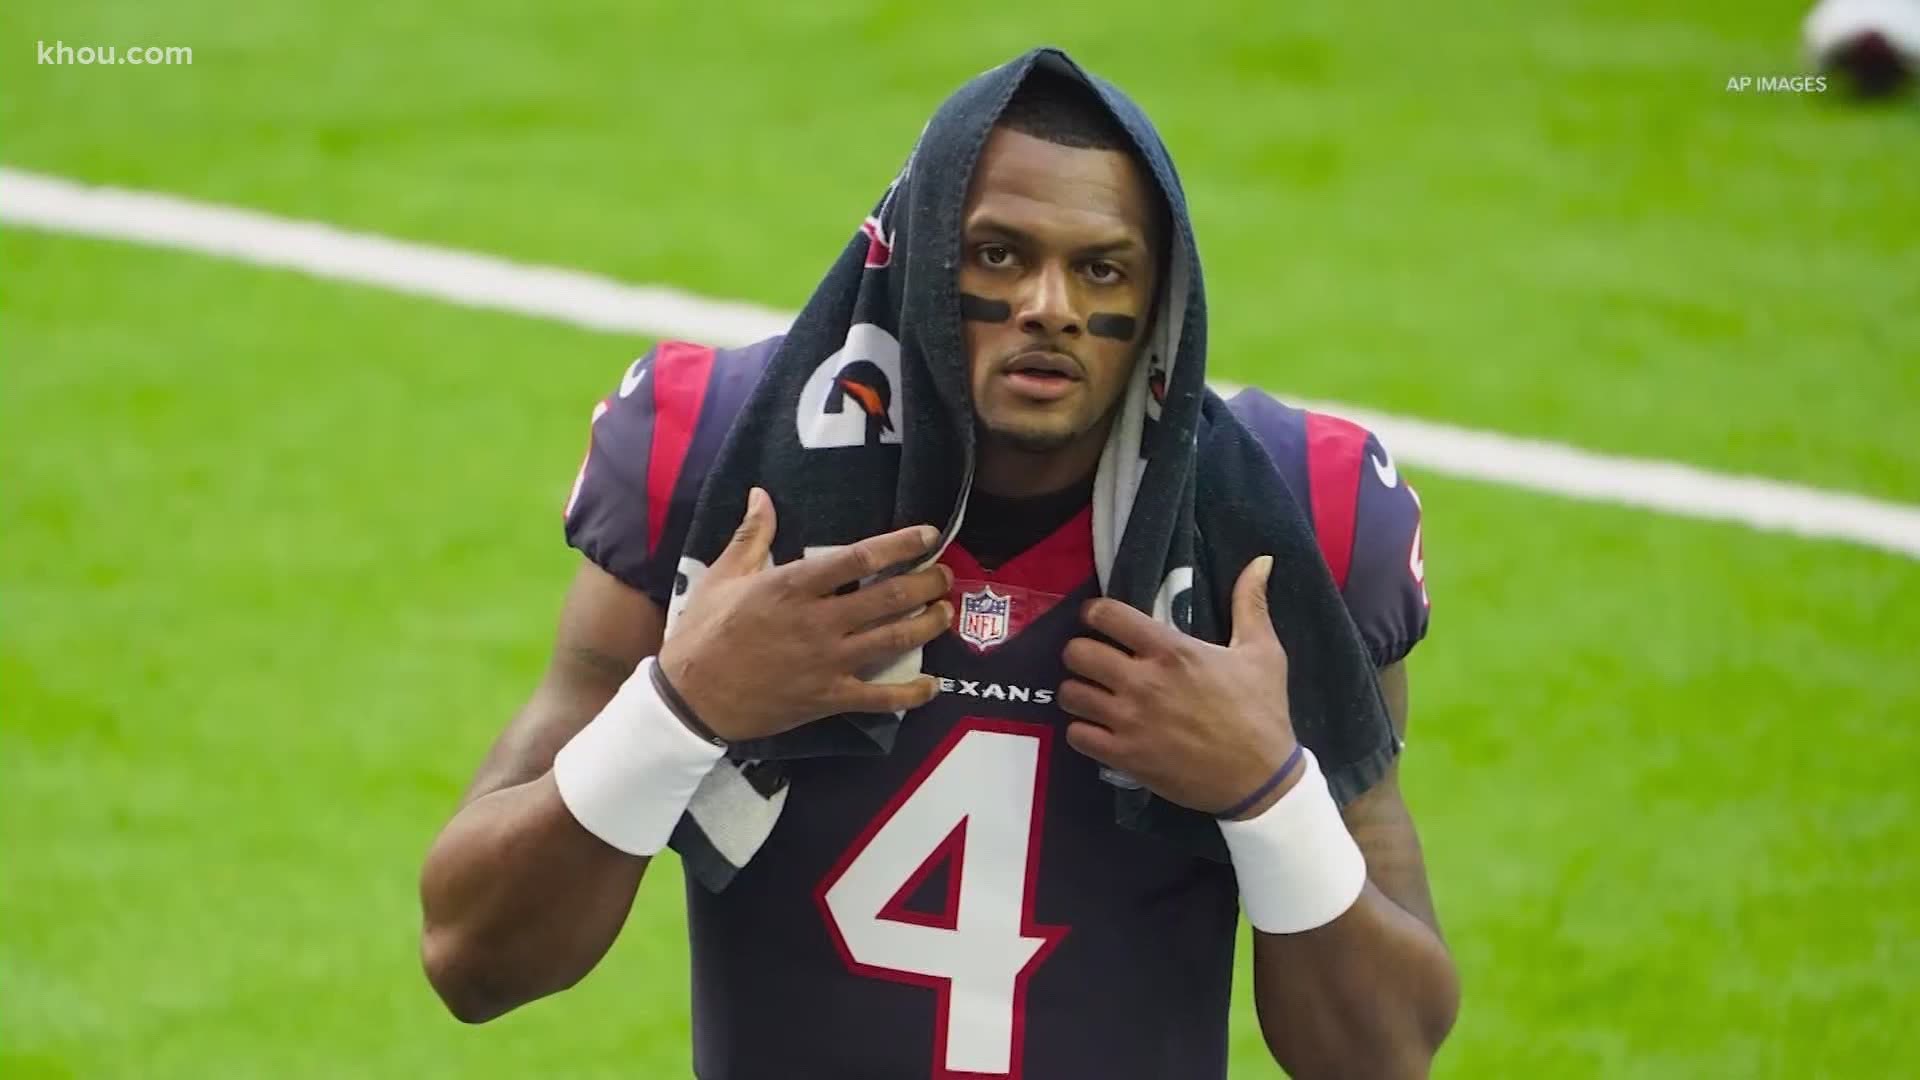 Details of Deshaun Watson's frustrations continue to spill out.